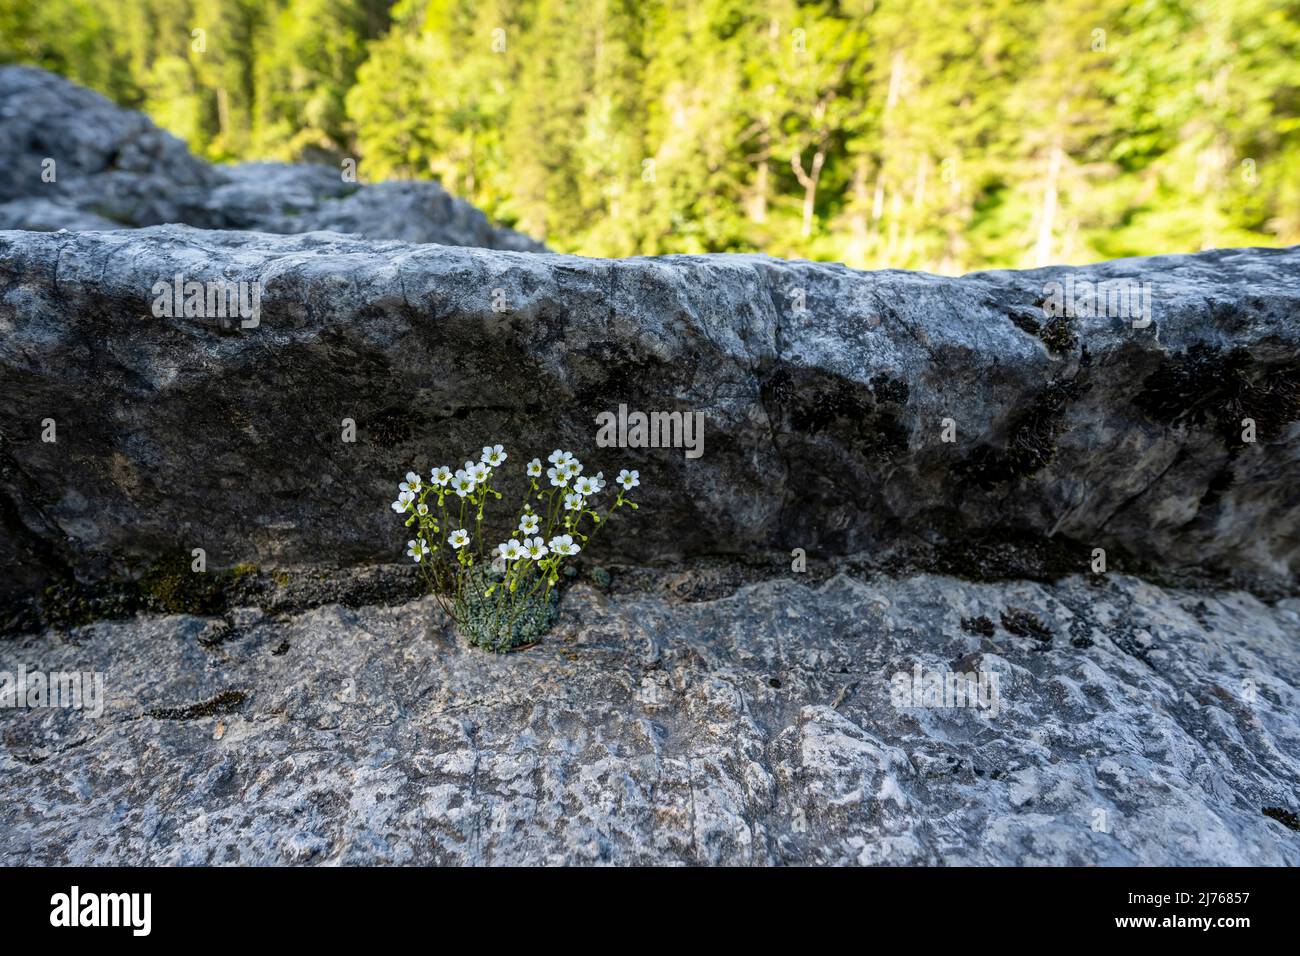 Galmei spring kidney (Minuartia verna subsp. hercynica) or Harzer Frühlingsmiere called, grows in a rocky sneeze on the Rissbach in the karwendel, the Tyrolean Alps. Stock Photo